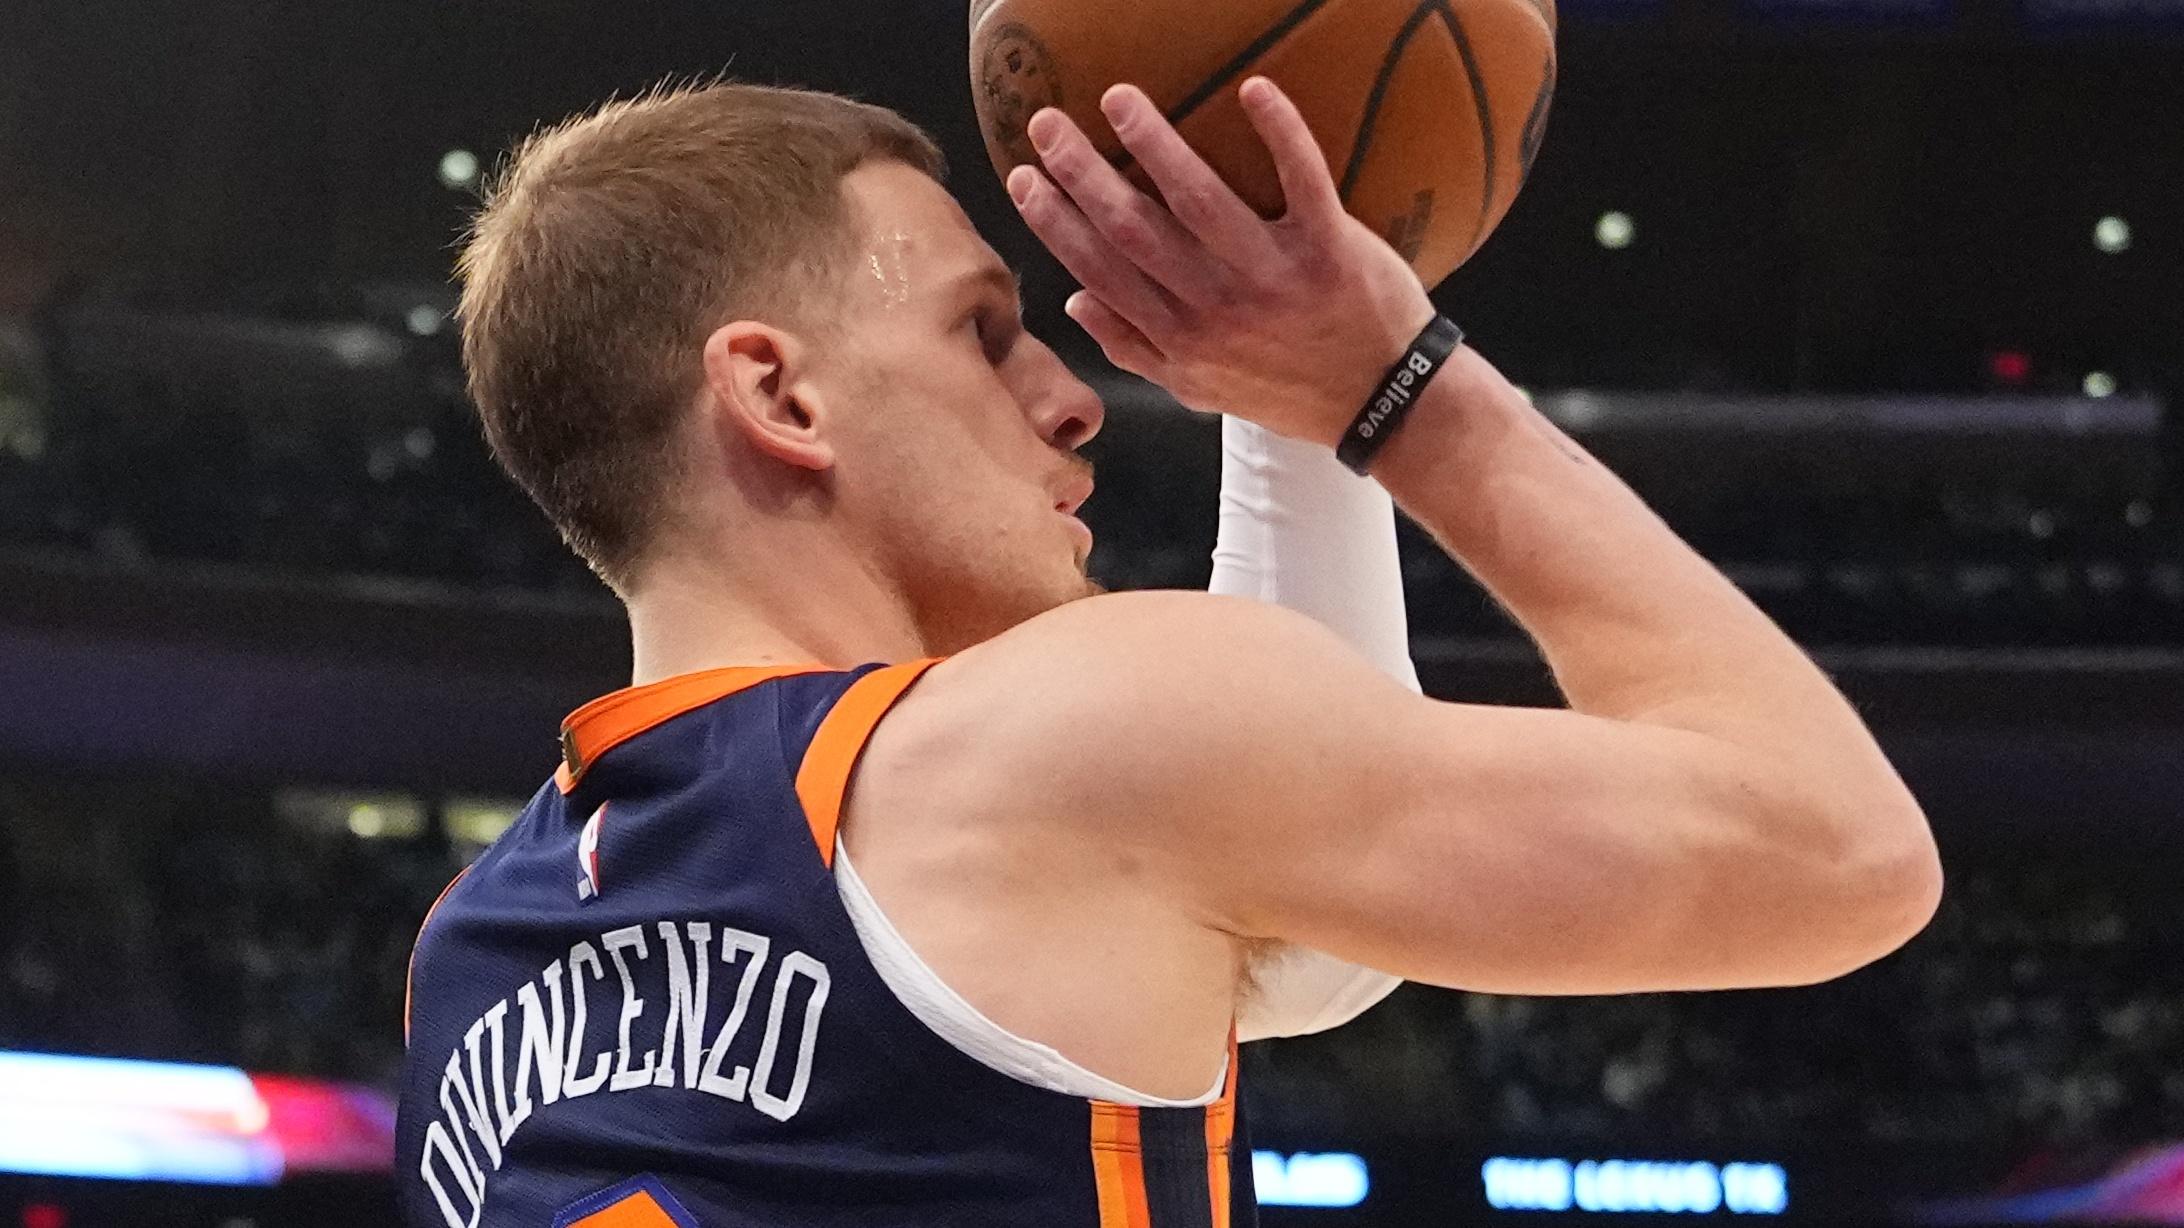 New York Knicks shooting guard Donte DiVincenzo (0) shoots a three point basket against the Los Angeles Clippers during the first half at Madison Square Garden / Brad Penner - USA TODAY Sports